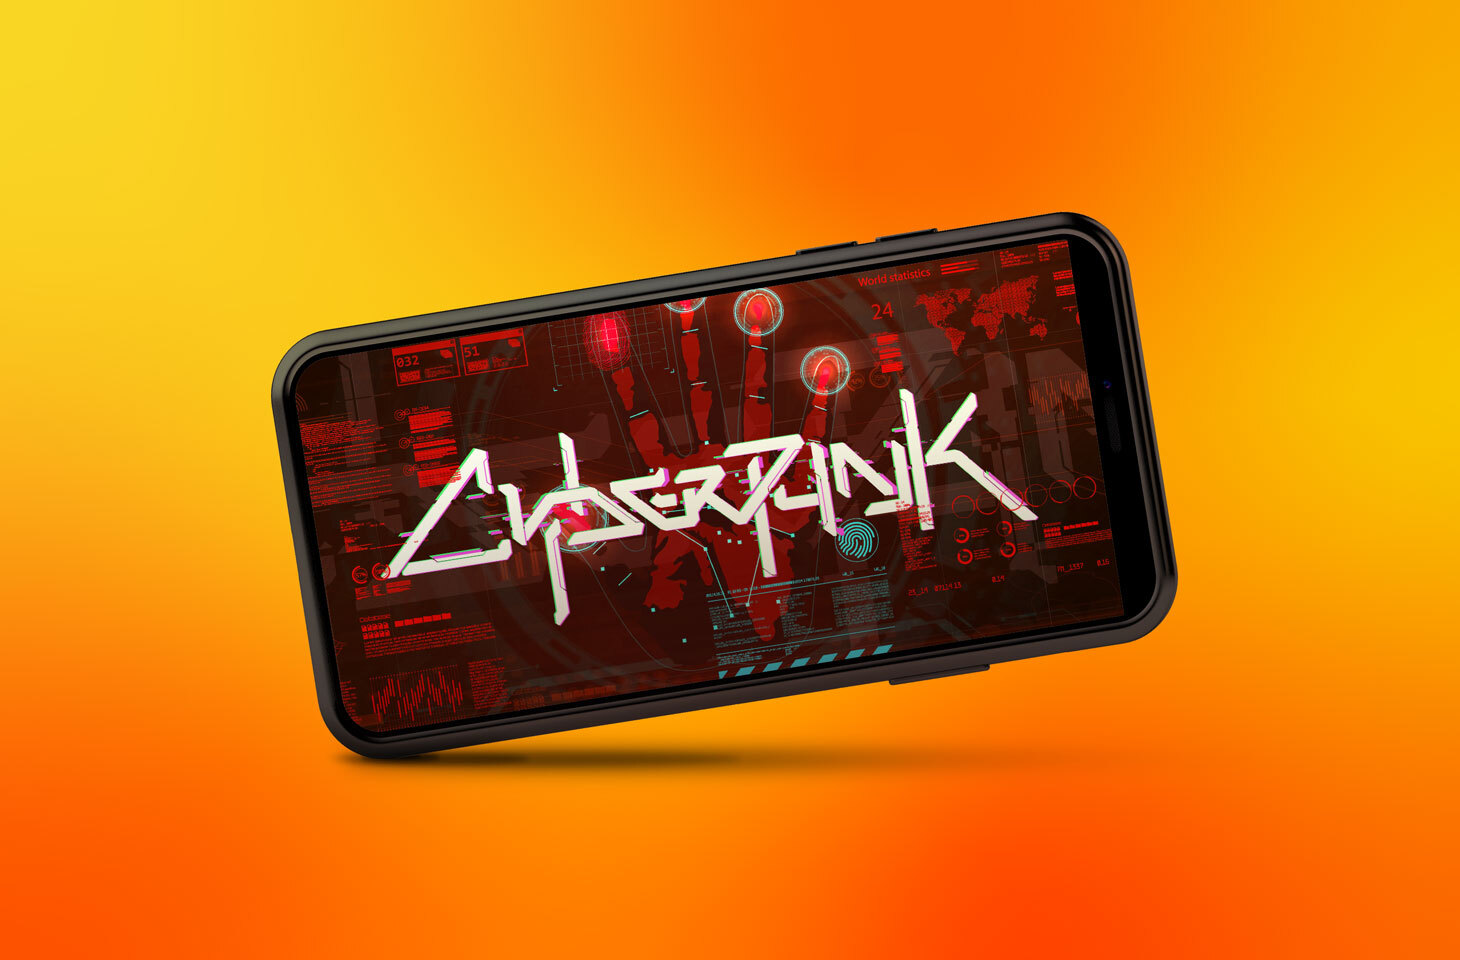 Ransomware disguised as an Android version of Cyberpunk 2077